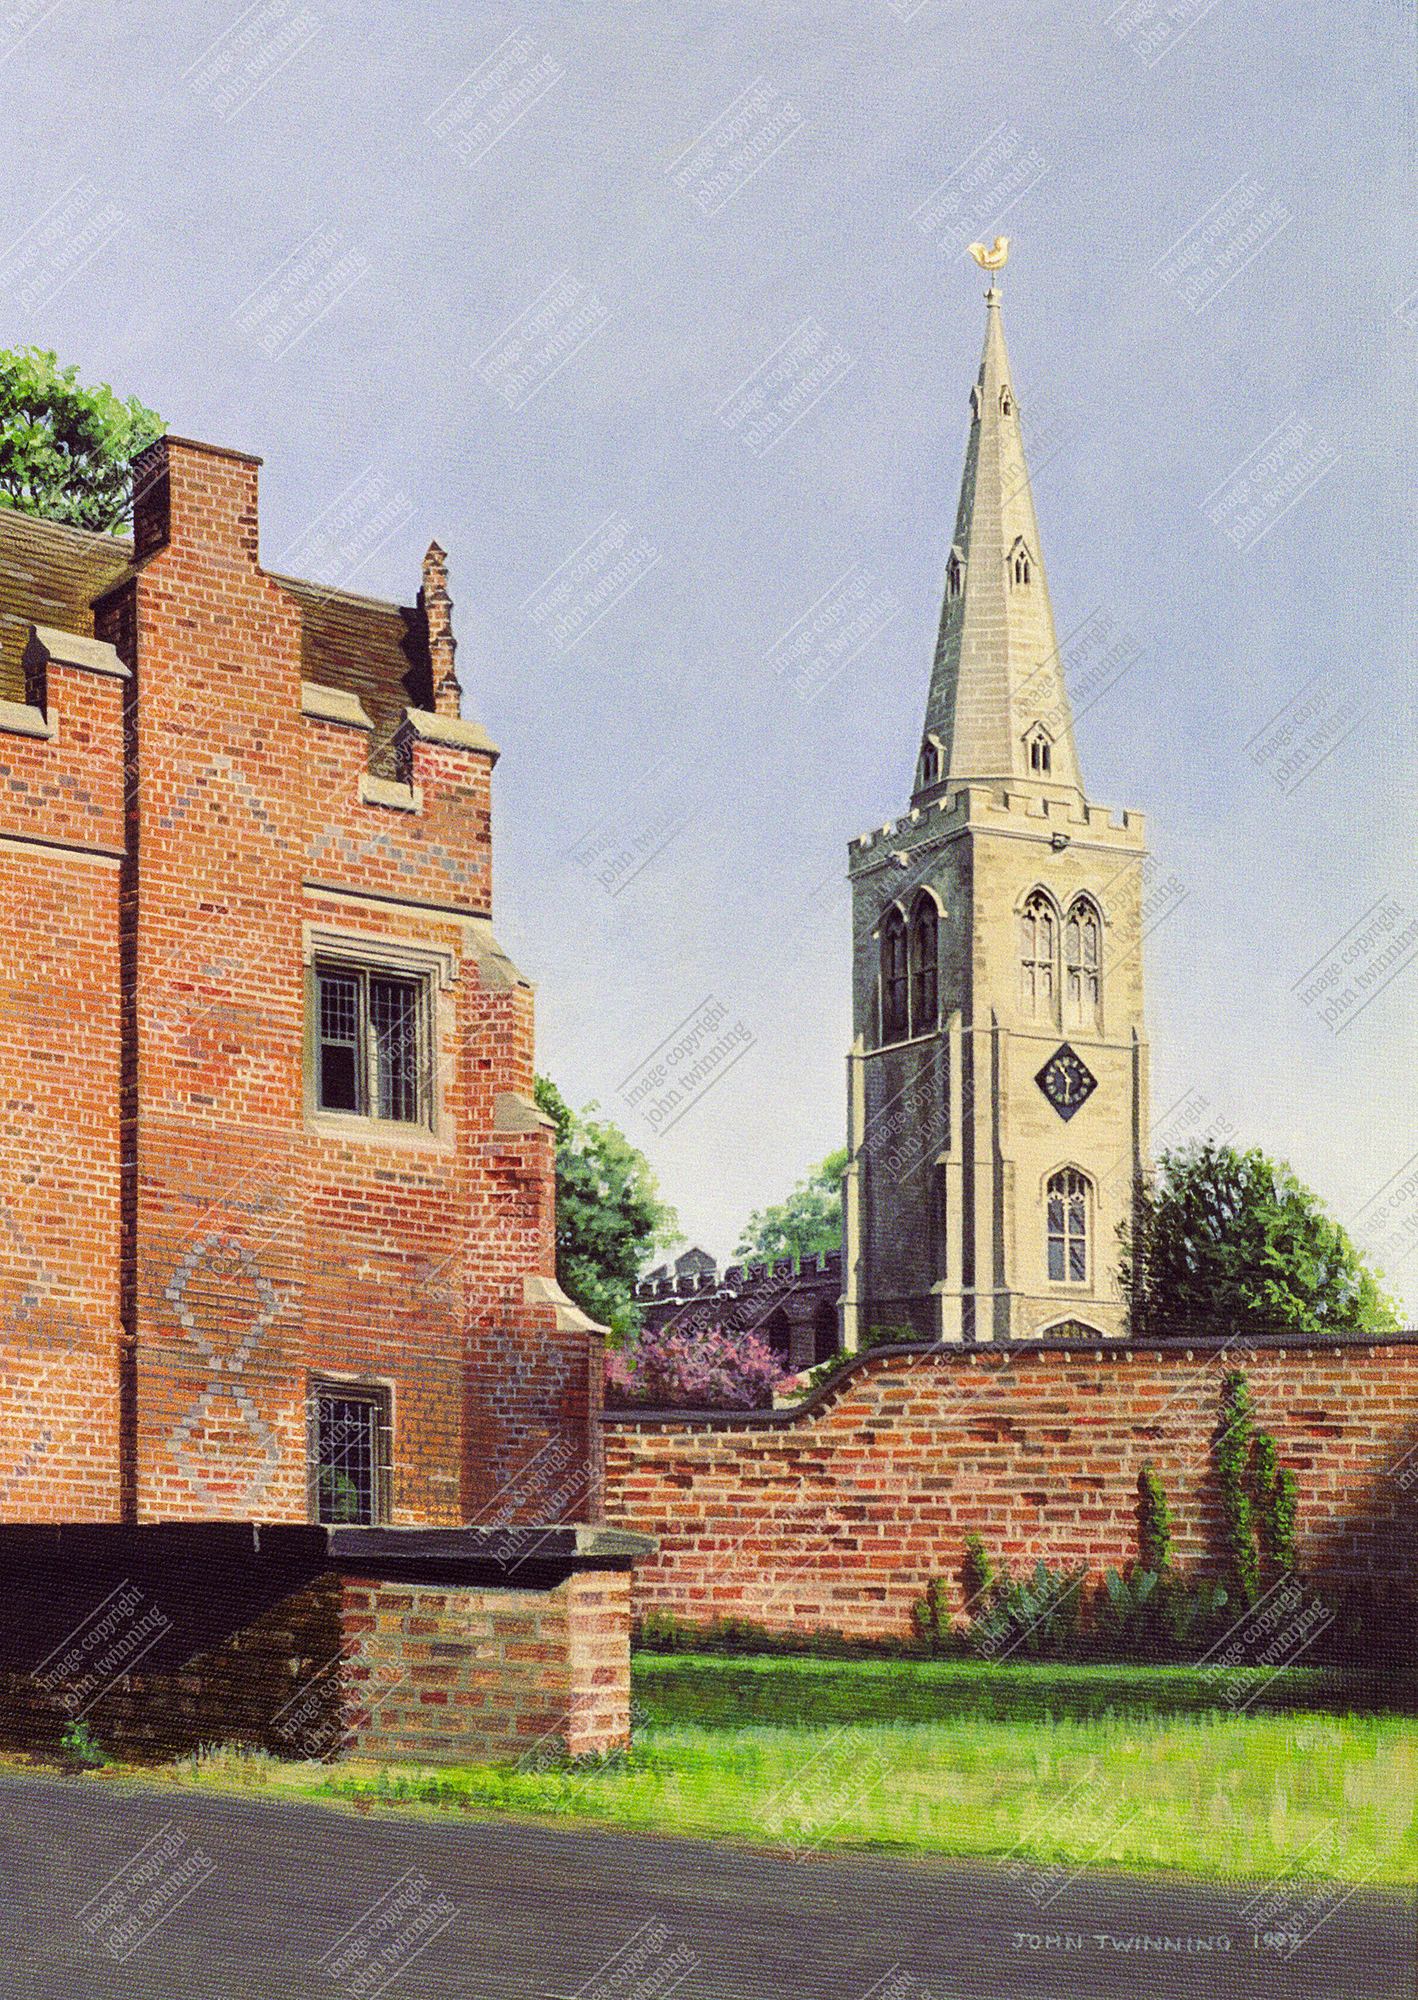 'St Mary's from Buckden Towers' - art print from a painting of this cambridgeshire village's parish church